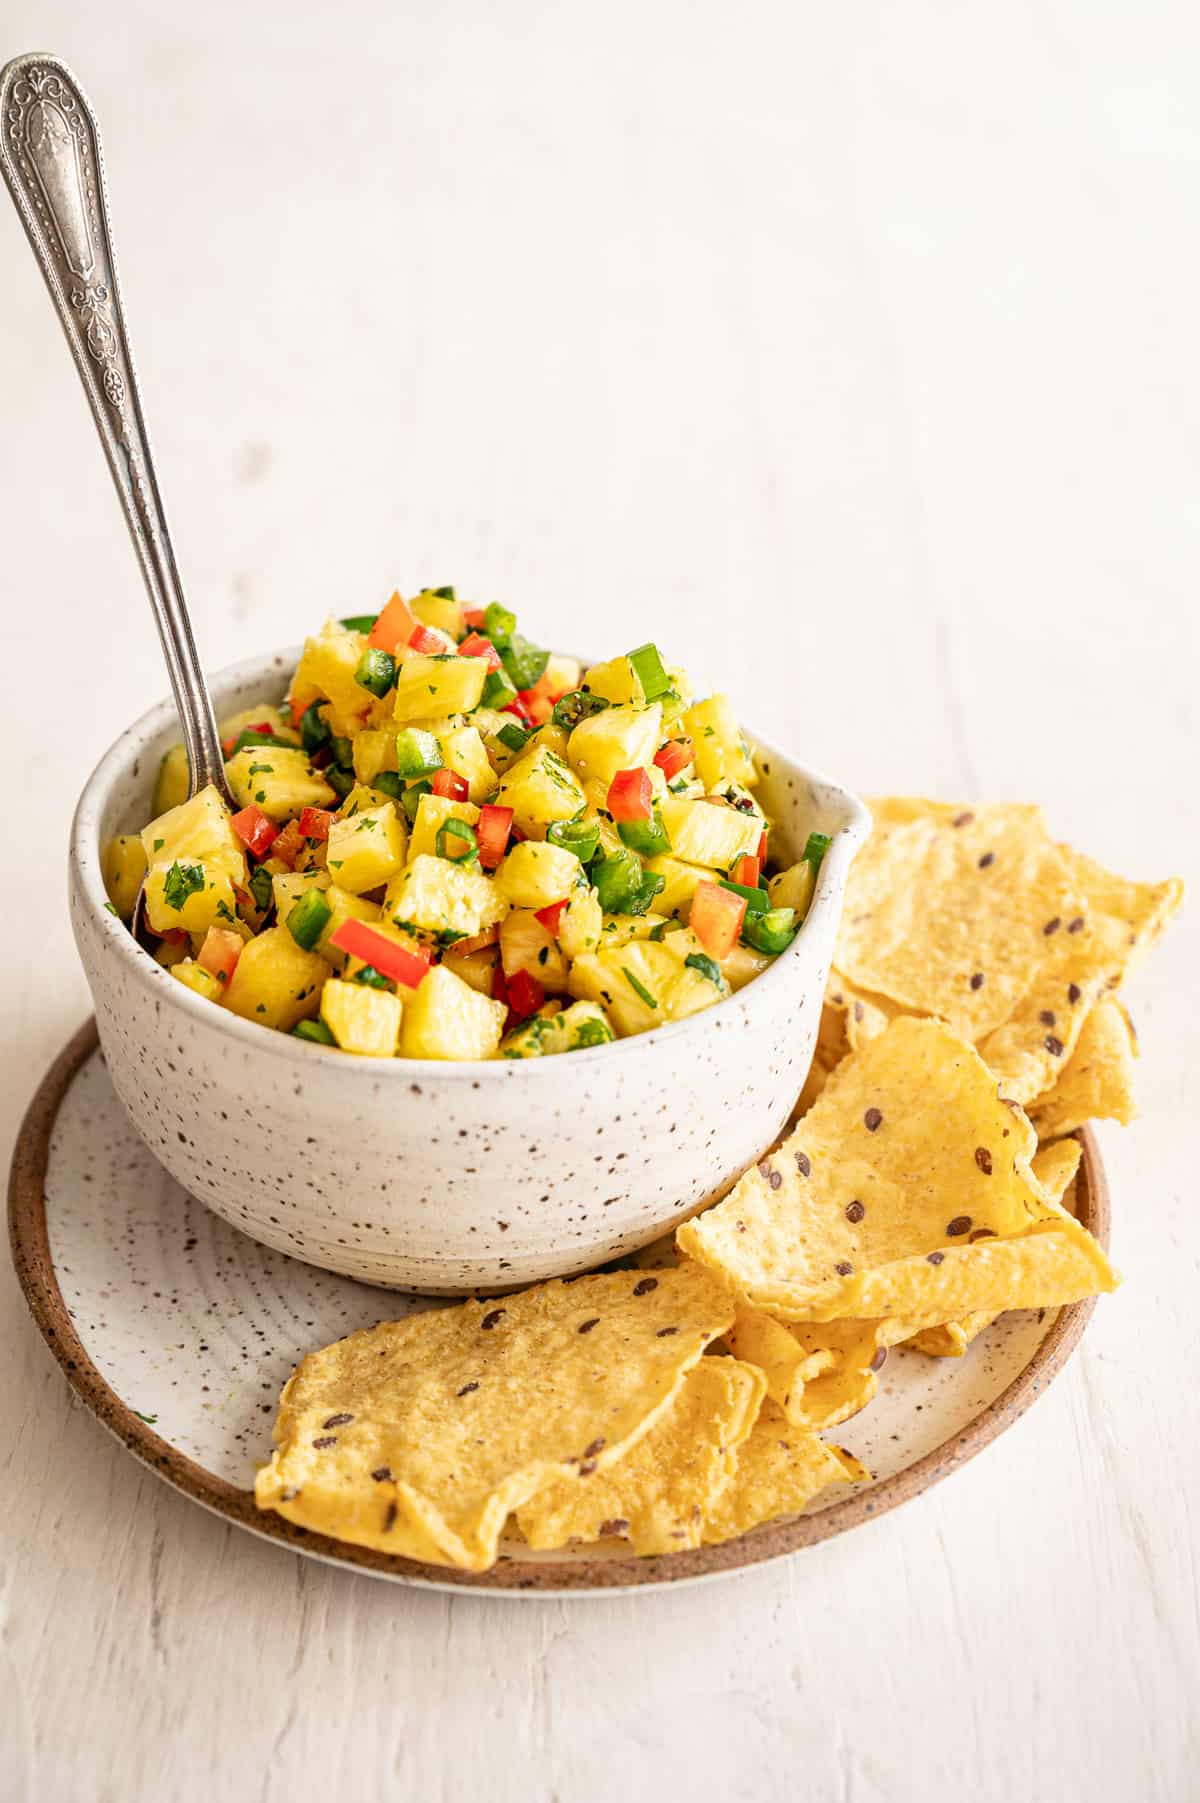 A crock of pineapple salsa with tortilla chips on the side.